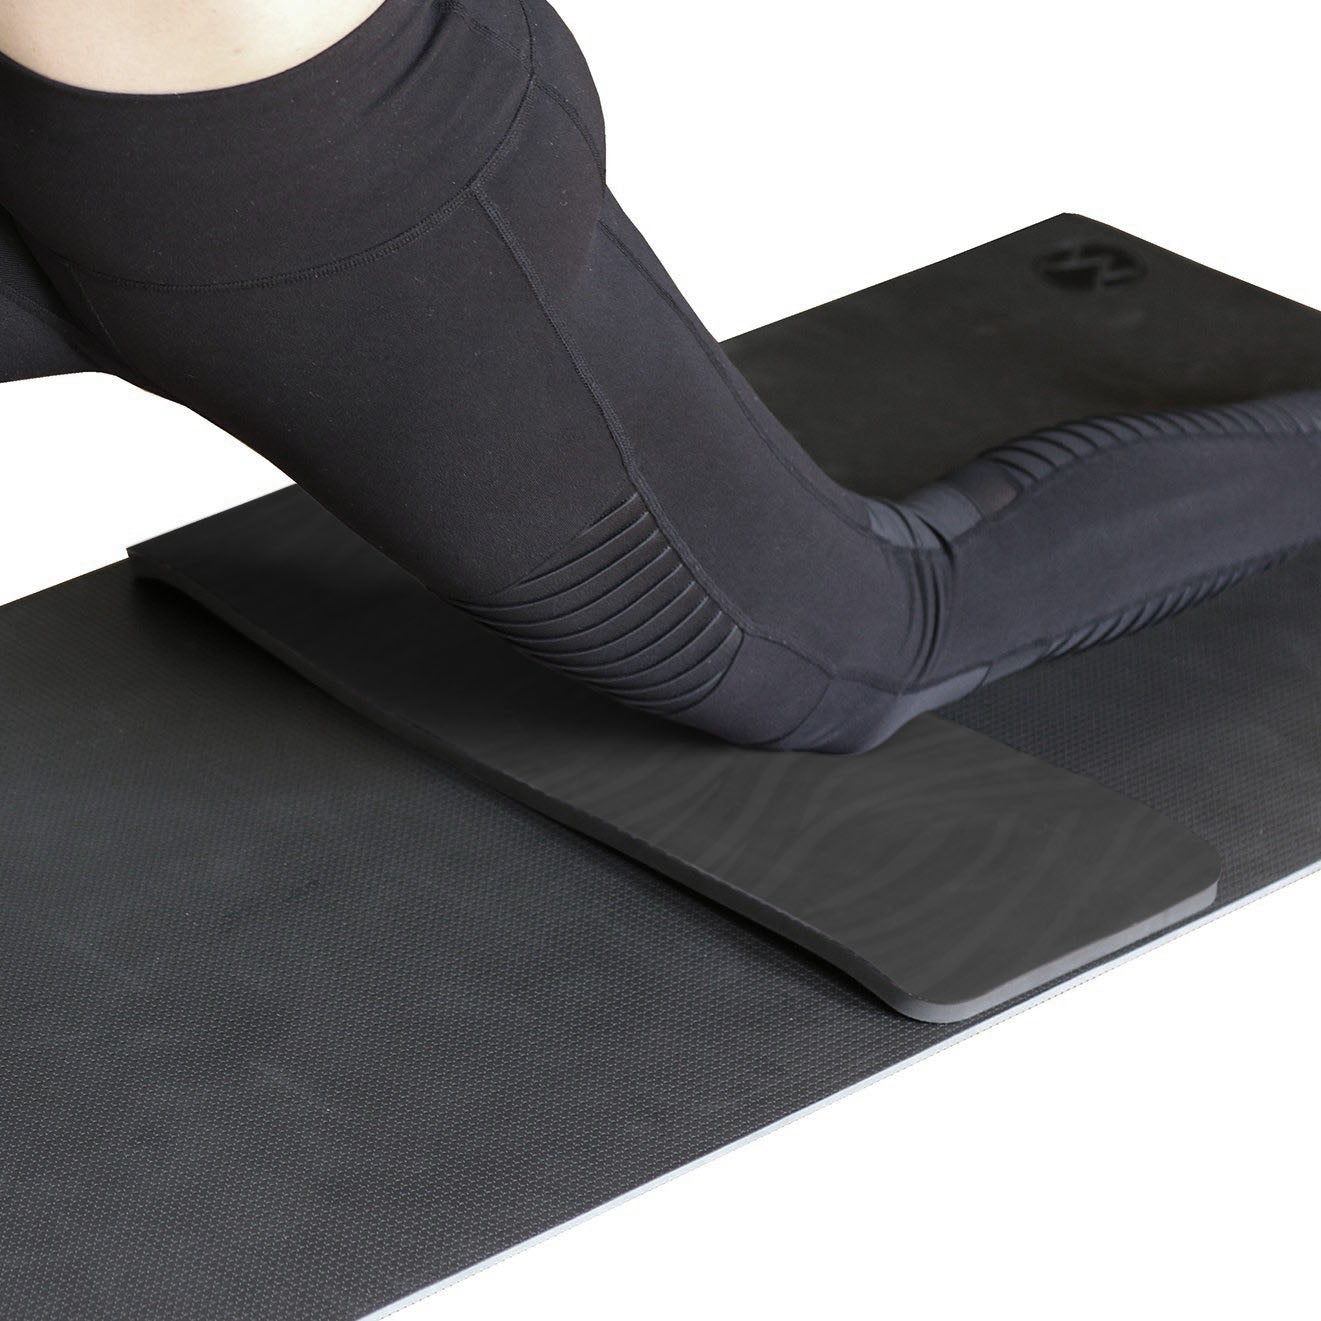 Yoga Paws Review: The Best Travel Yoga Mat